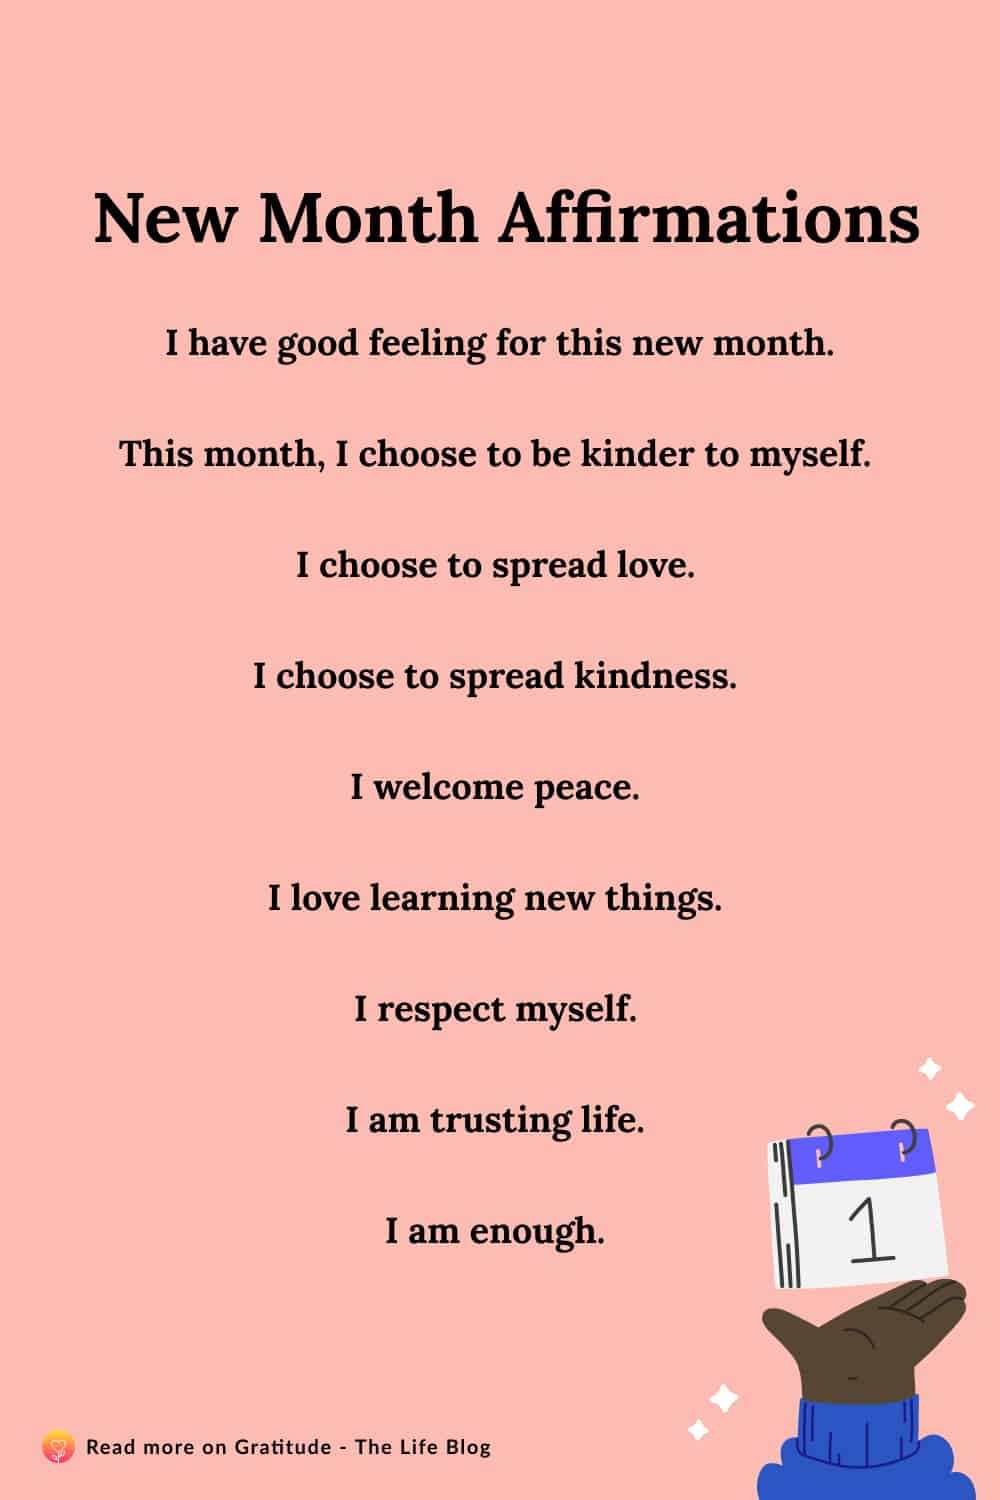 Image with list of new month affirmations